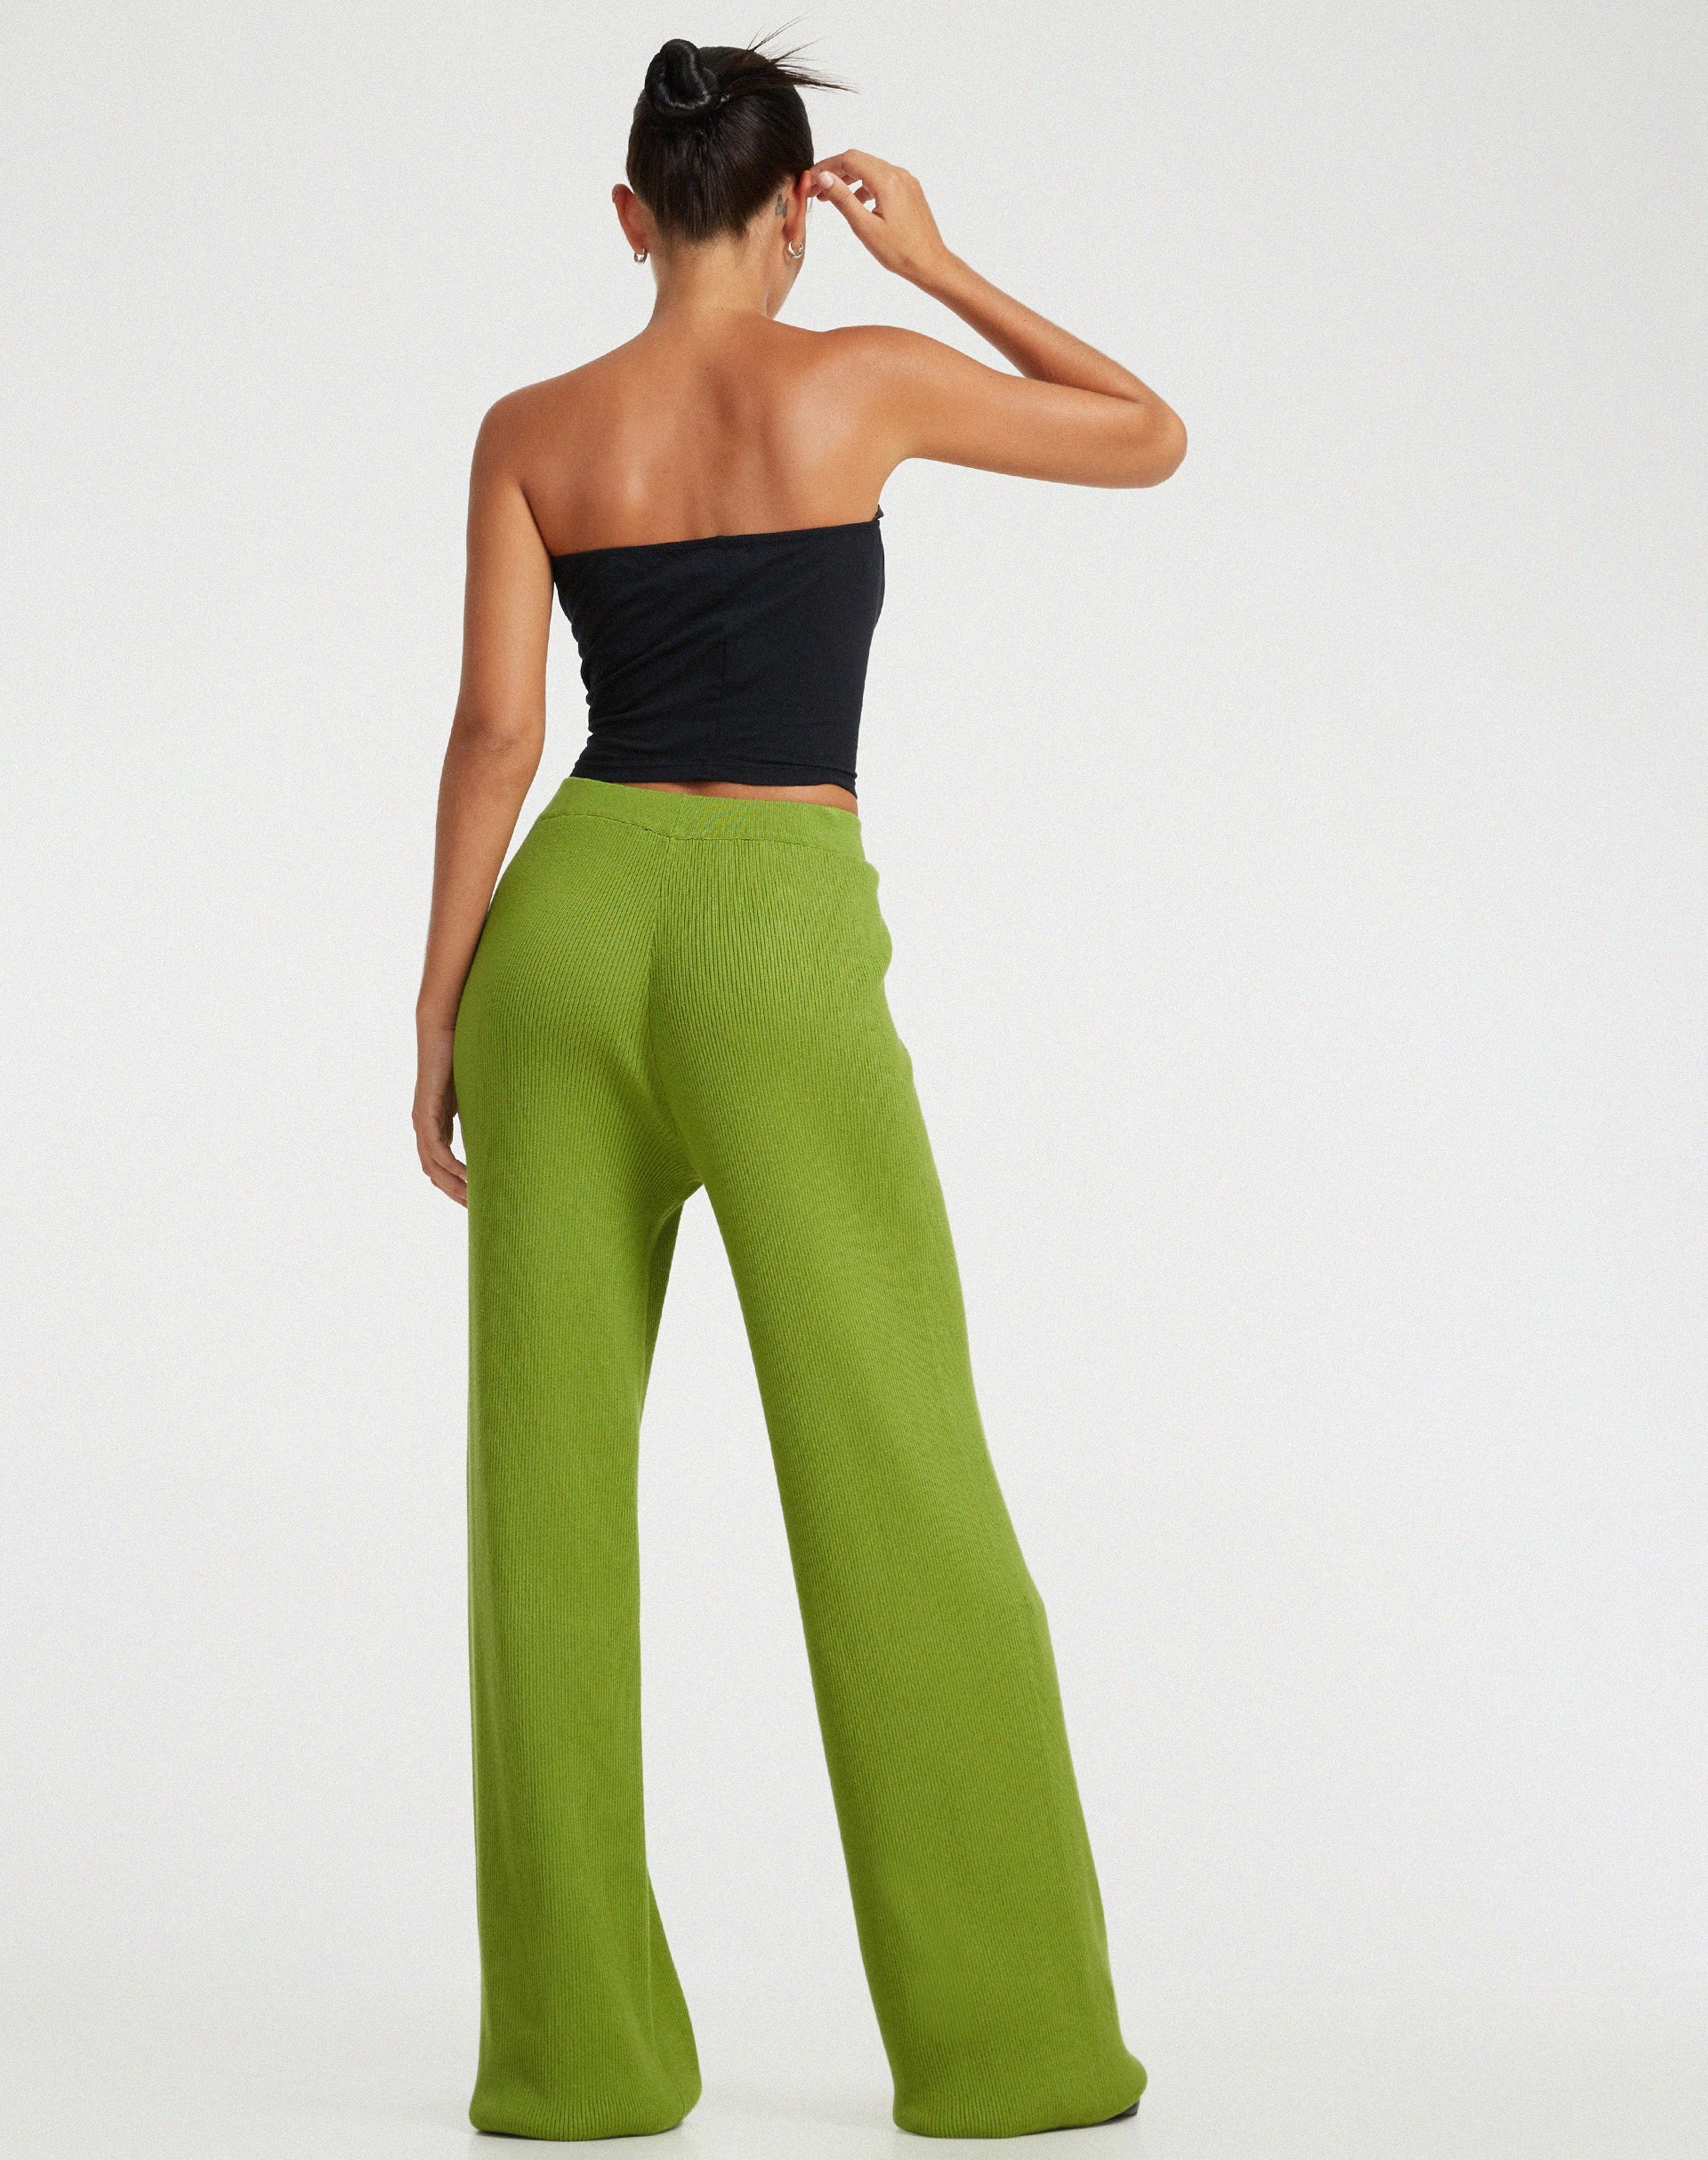 image of Adolia Flared Leg Trouser in Golden Lime